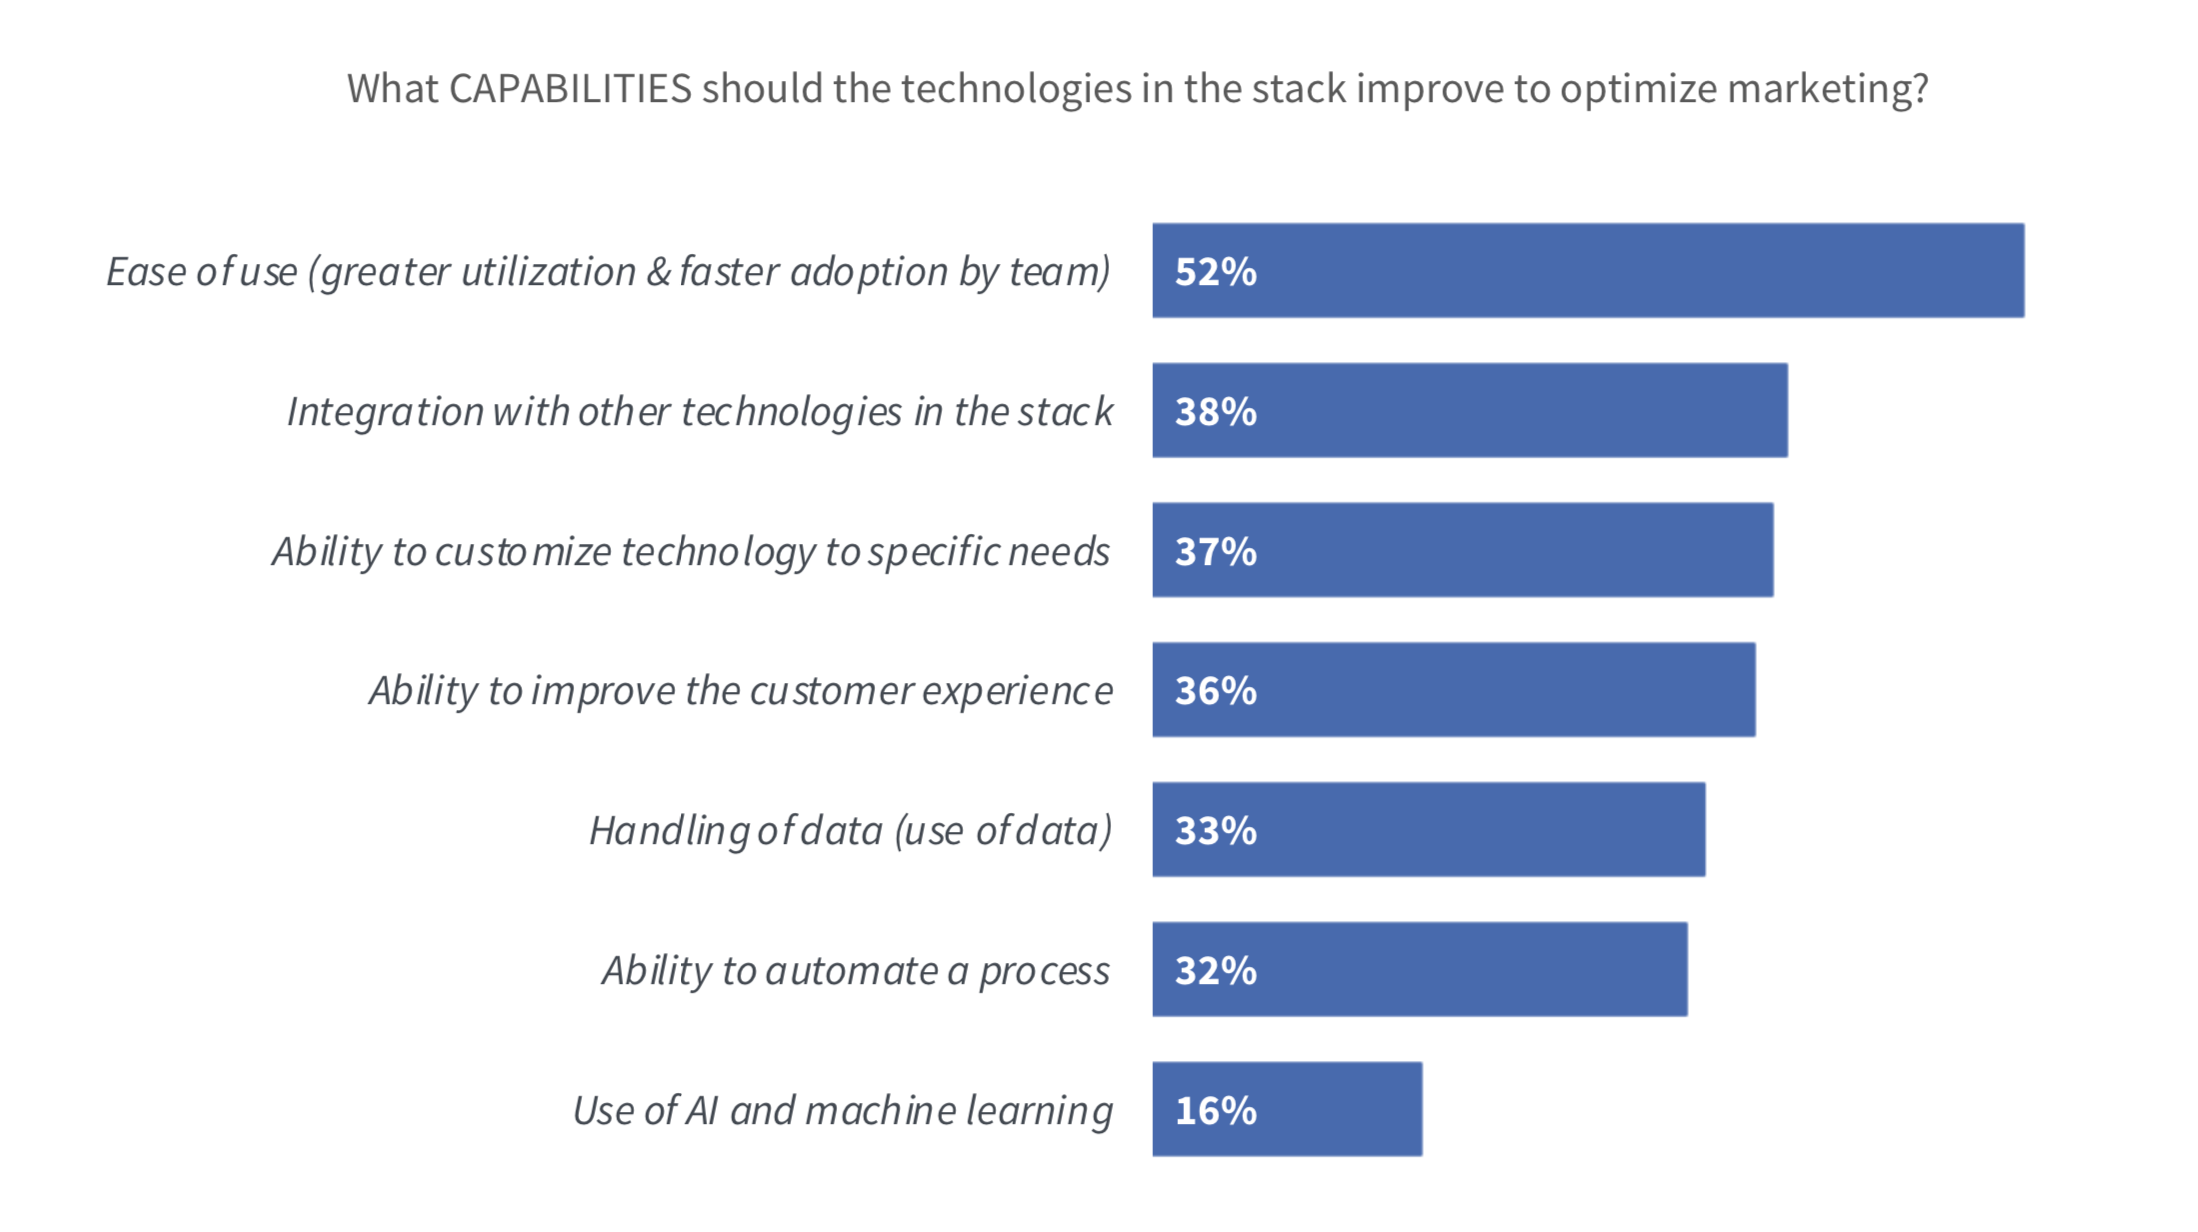 Capabilities that the Martech Stack Should Improve